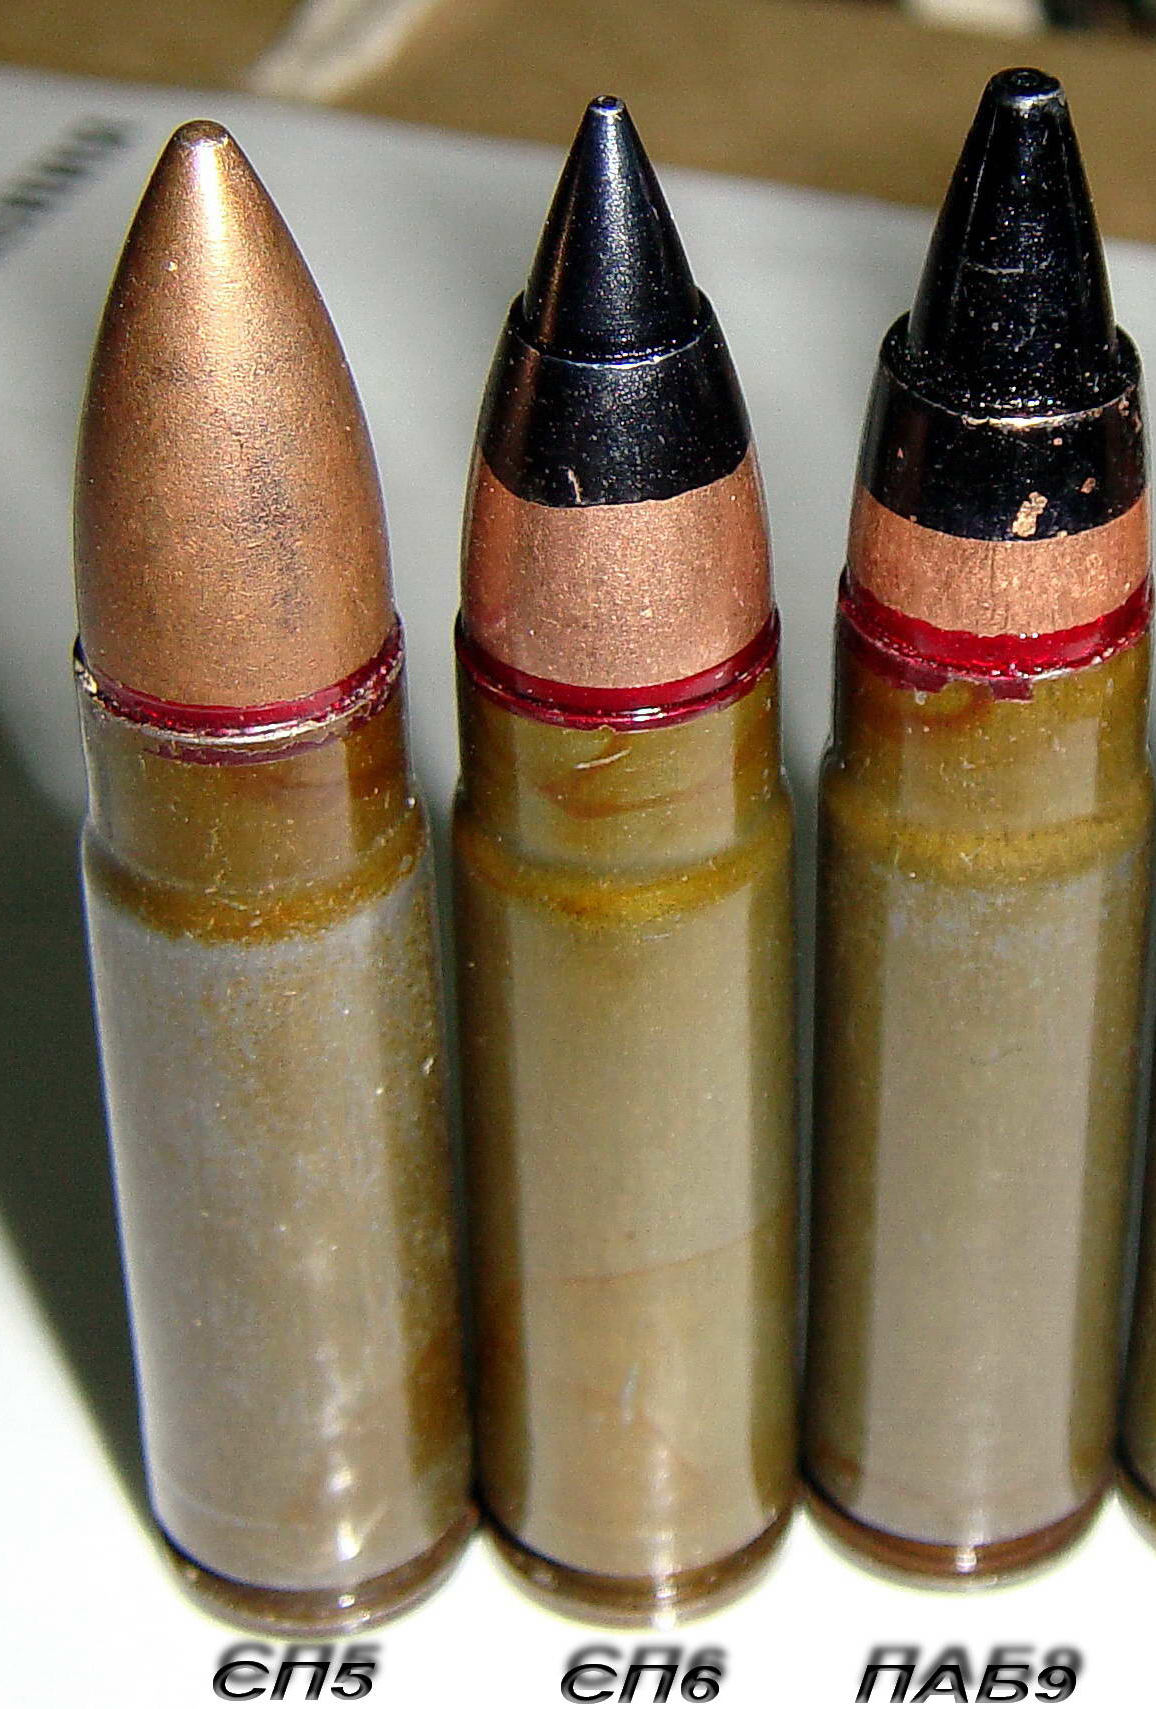 9x39mm rounds are subsonic rounds modeled after the soviet 7.62x39mm cartri...